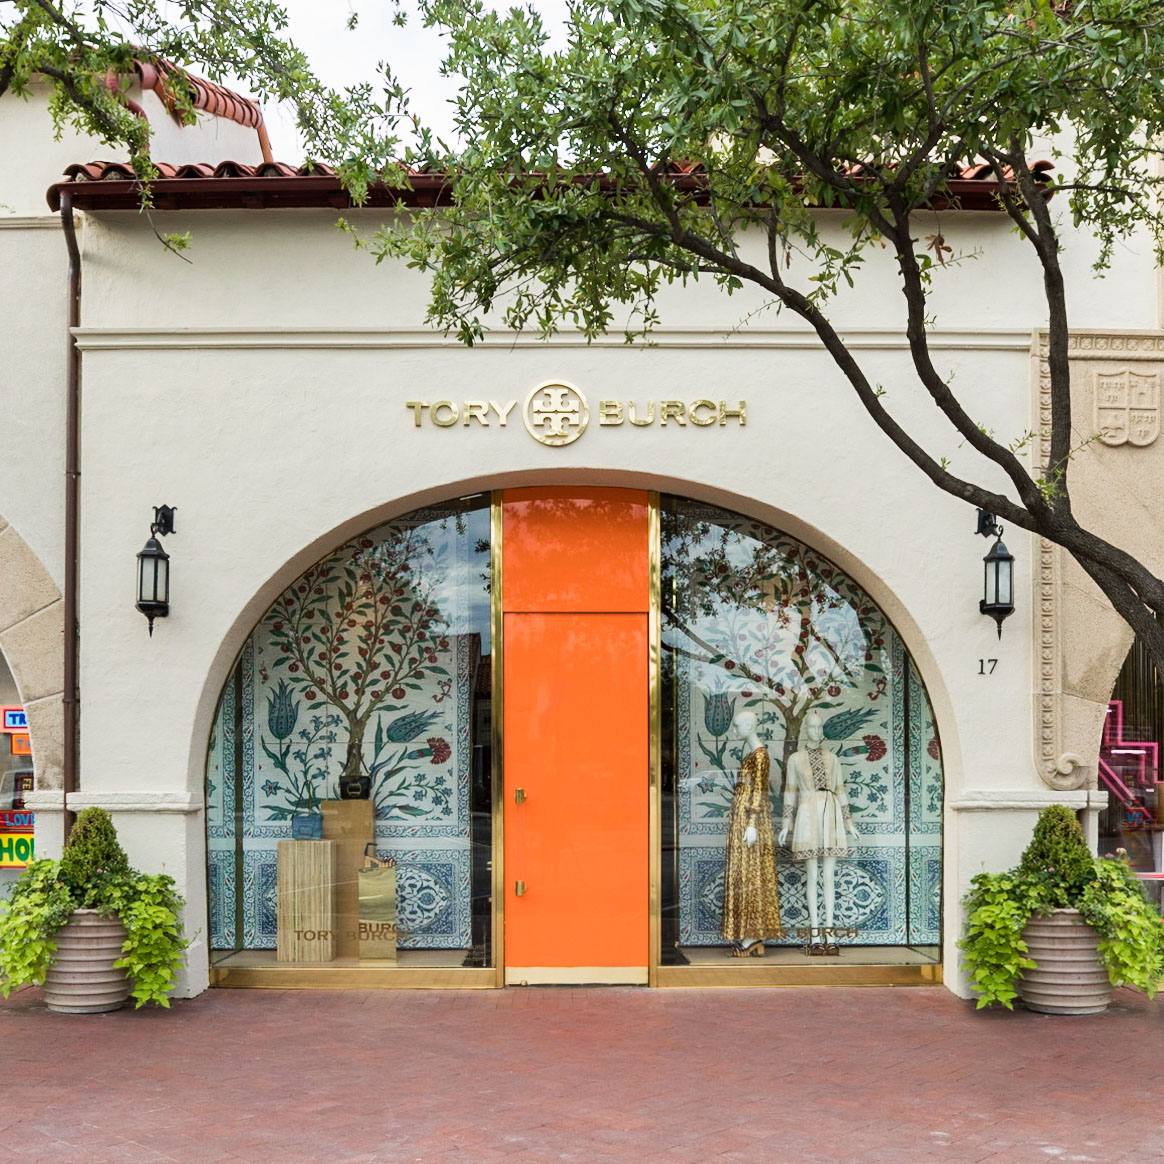 Everything About Tory Burch and Her Luxury Fashion Brand - The Teal Mango